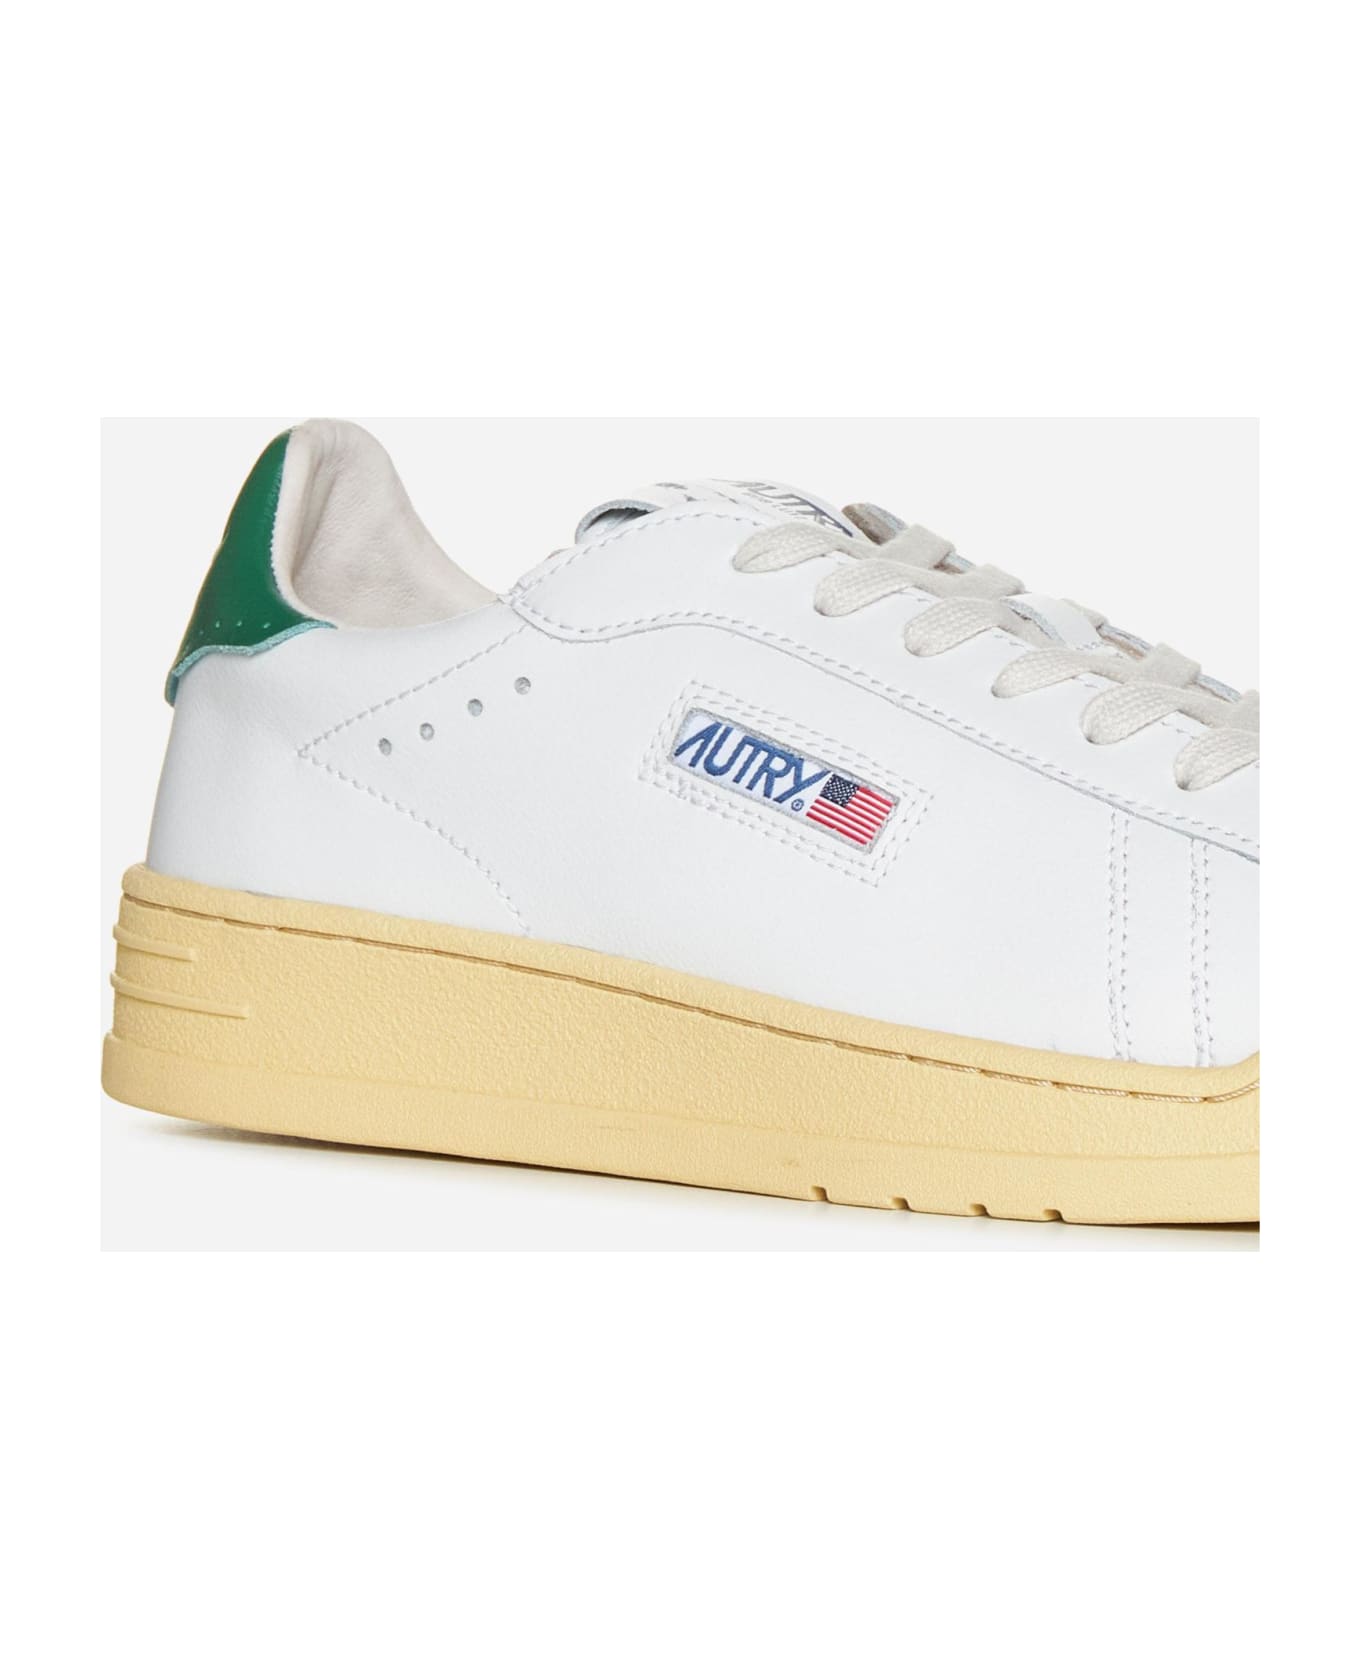 Autry Bob Lutz Low-top Leather Sneakers - White, green